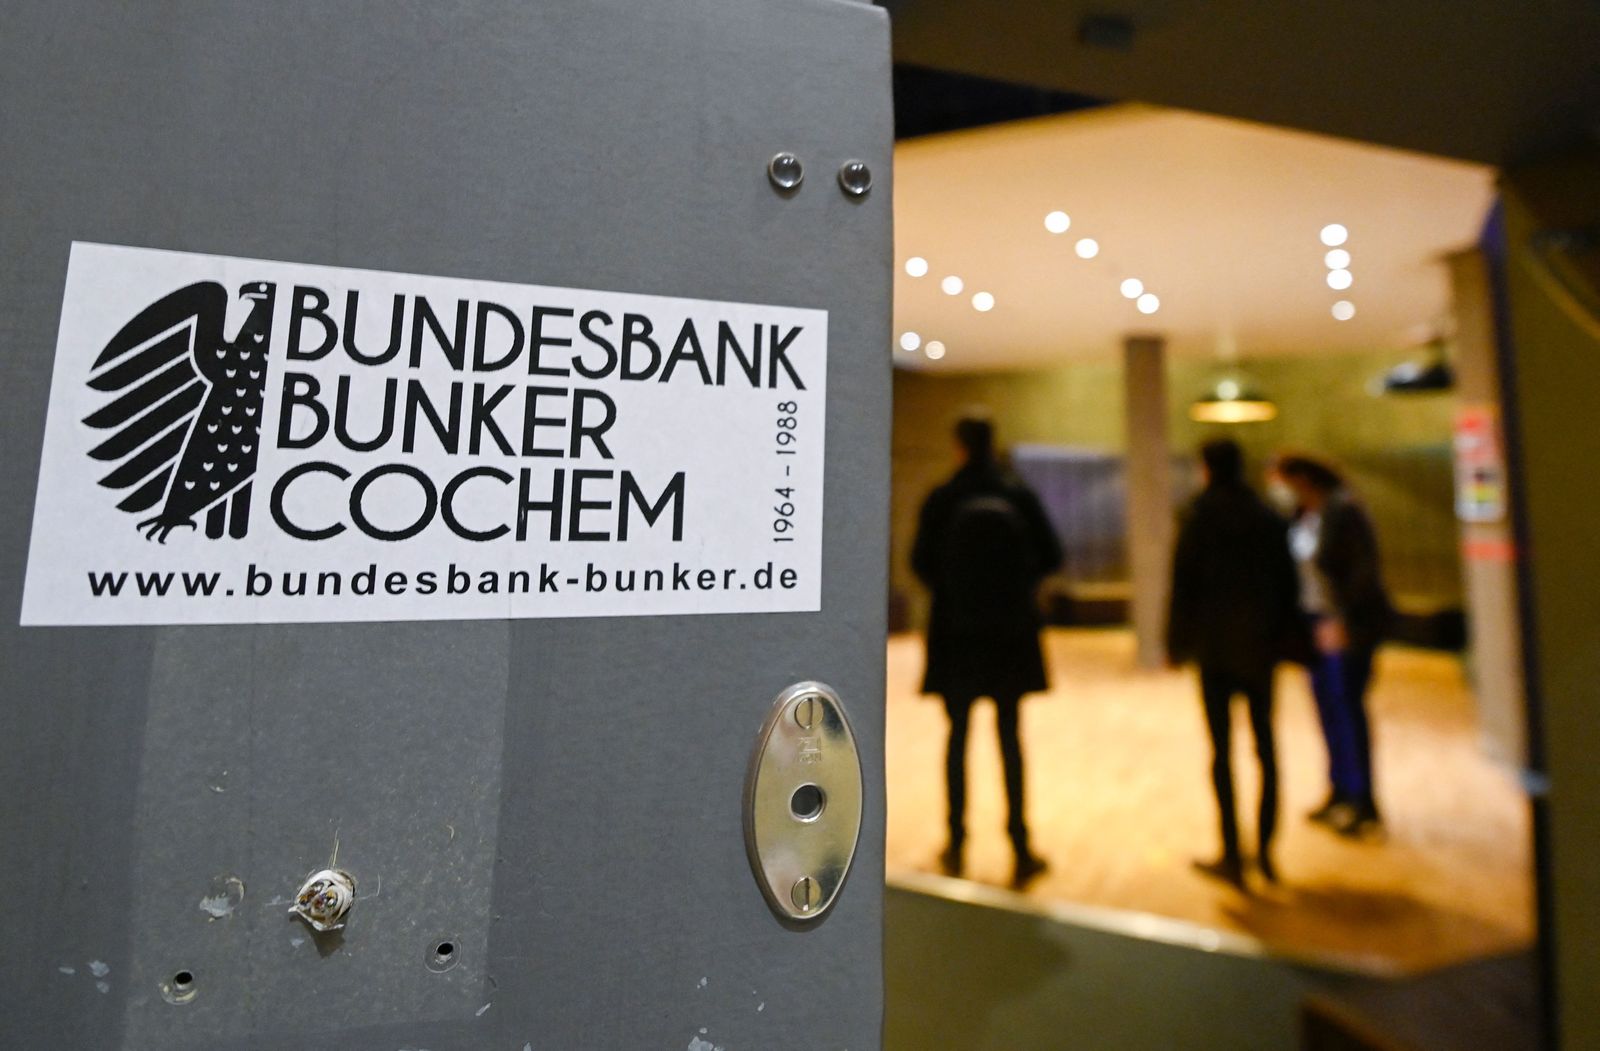 Visitors are seen in a former vault of the Bundesbank Bunker Museum in Cochem, western Germany on February 8, 2022. - The Bundesbank Bunker was a bunker of the German Federal Bank in Cochem for the storage of an emergency currency. From 1964 to 1988, up to 15 billion marks were stored in the top-secret facility to protect Germany from a national economic crisis in the event of hyperinflation caused by the Cold War. (Photo by Ina FASSBENDER / AFP) - AFP